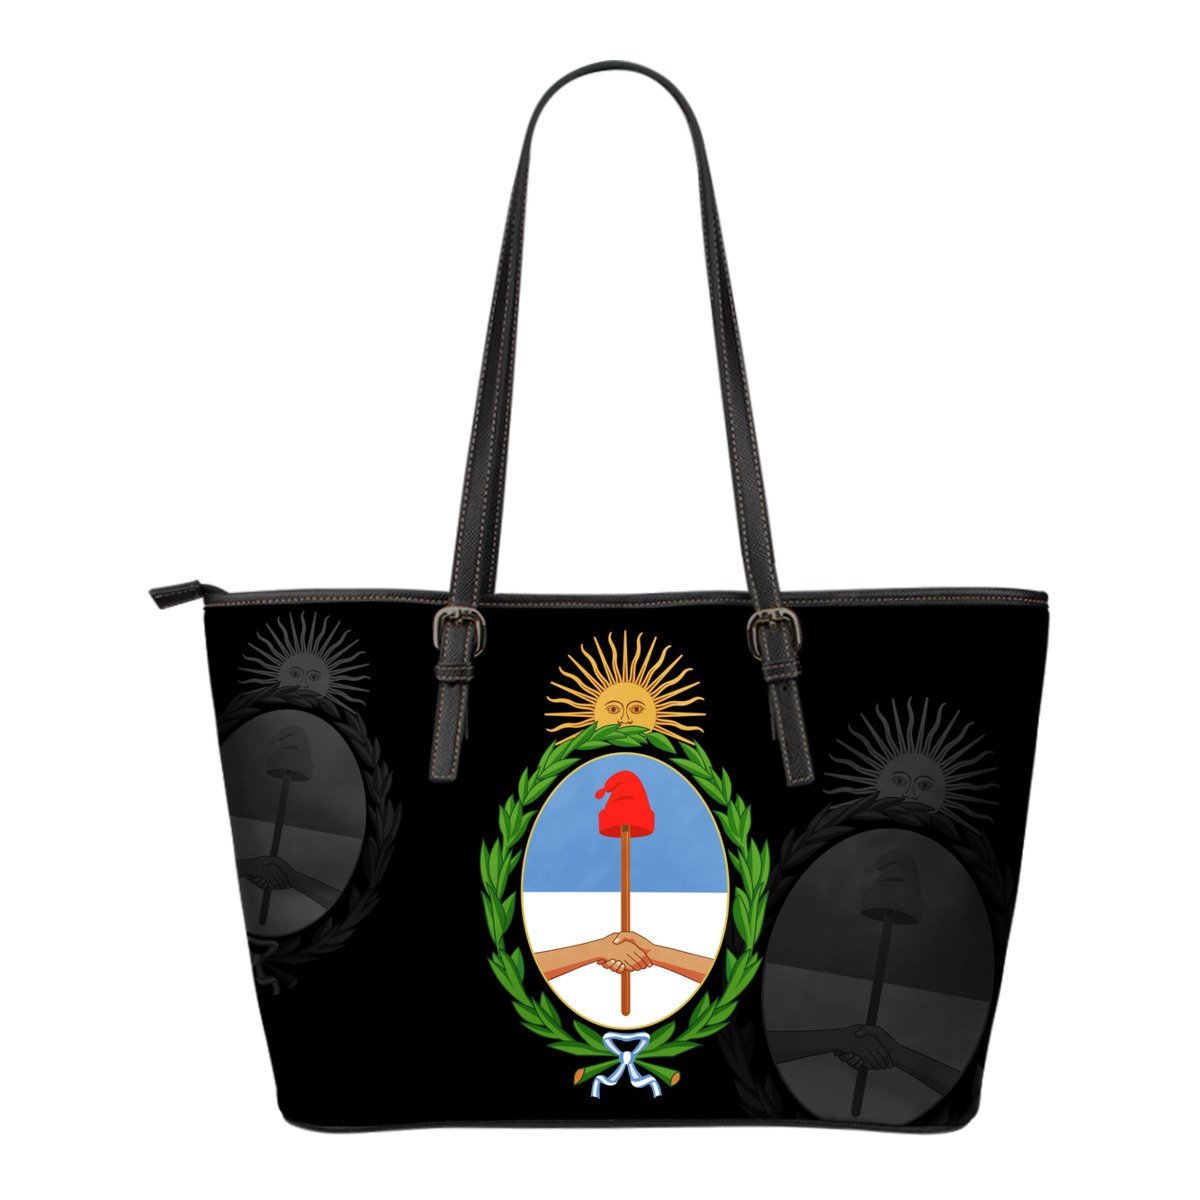 argentina-leather-tote-bag-small-size